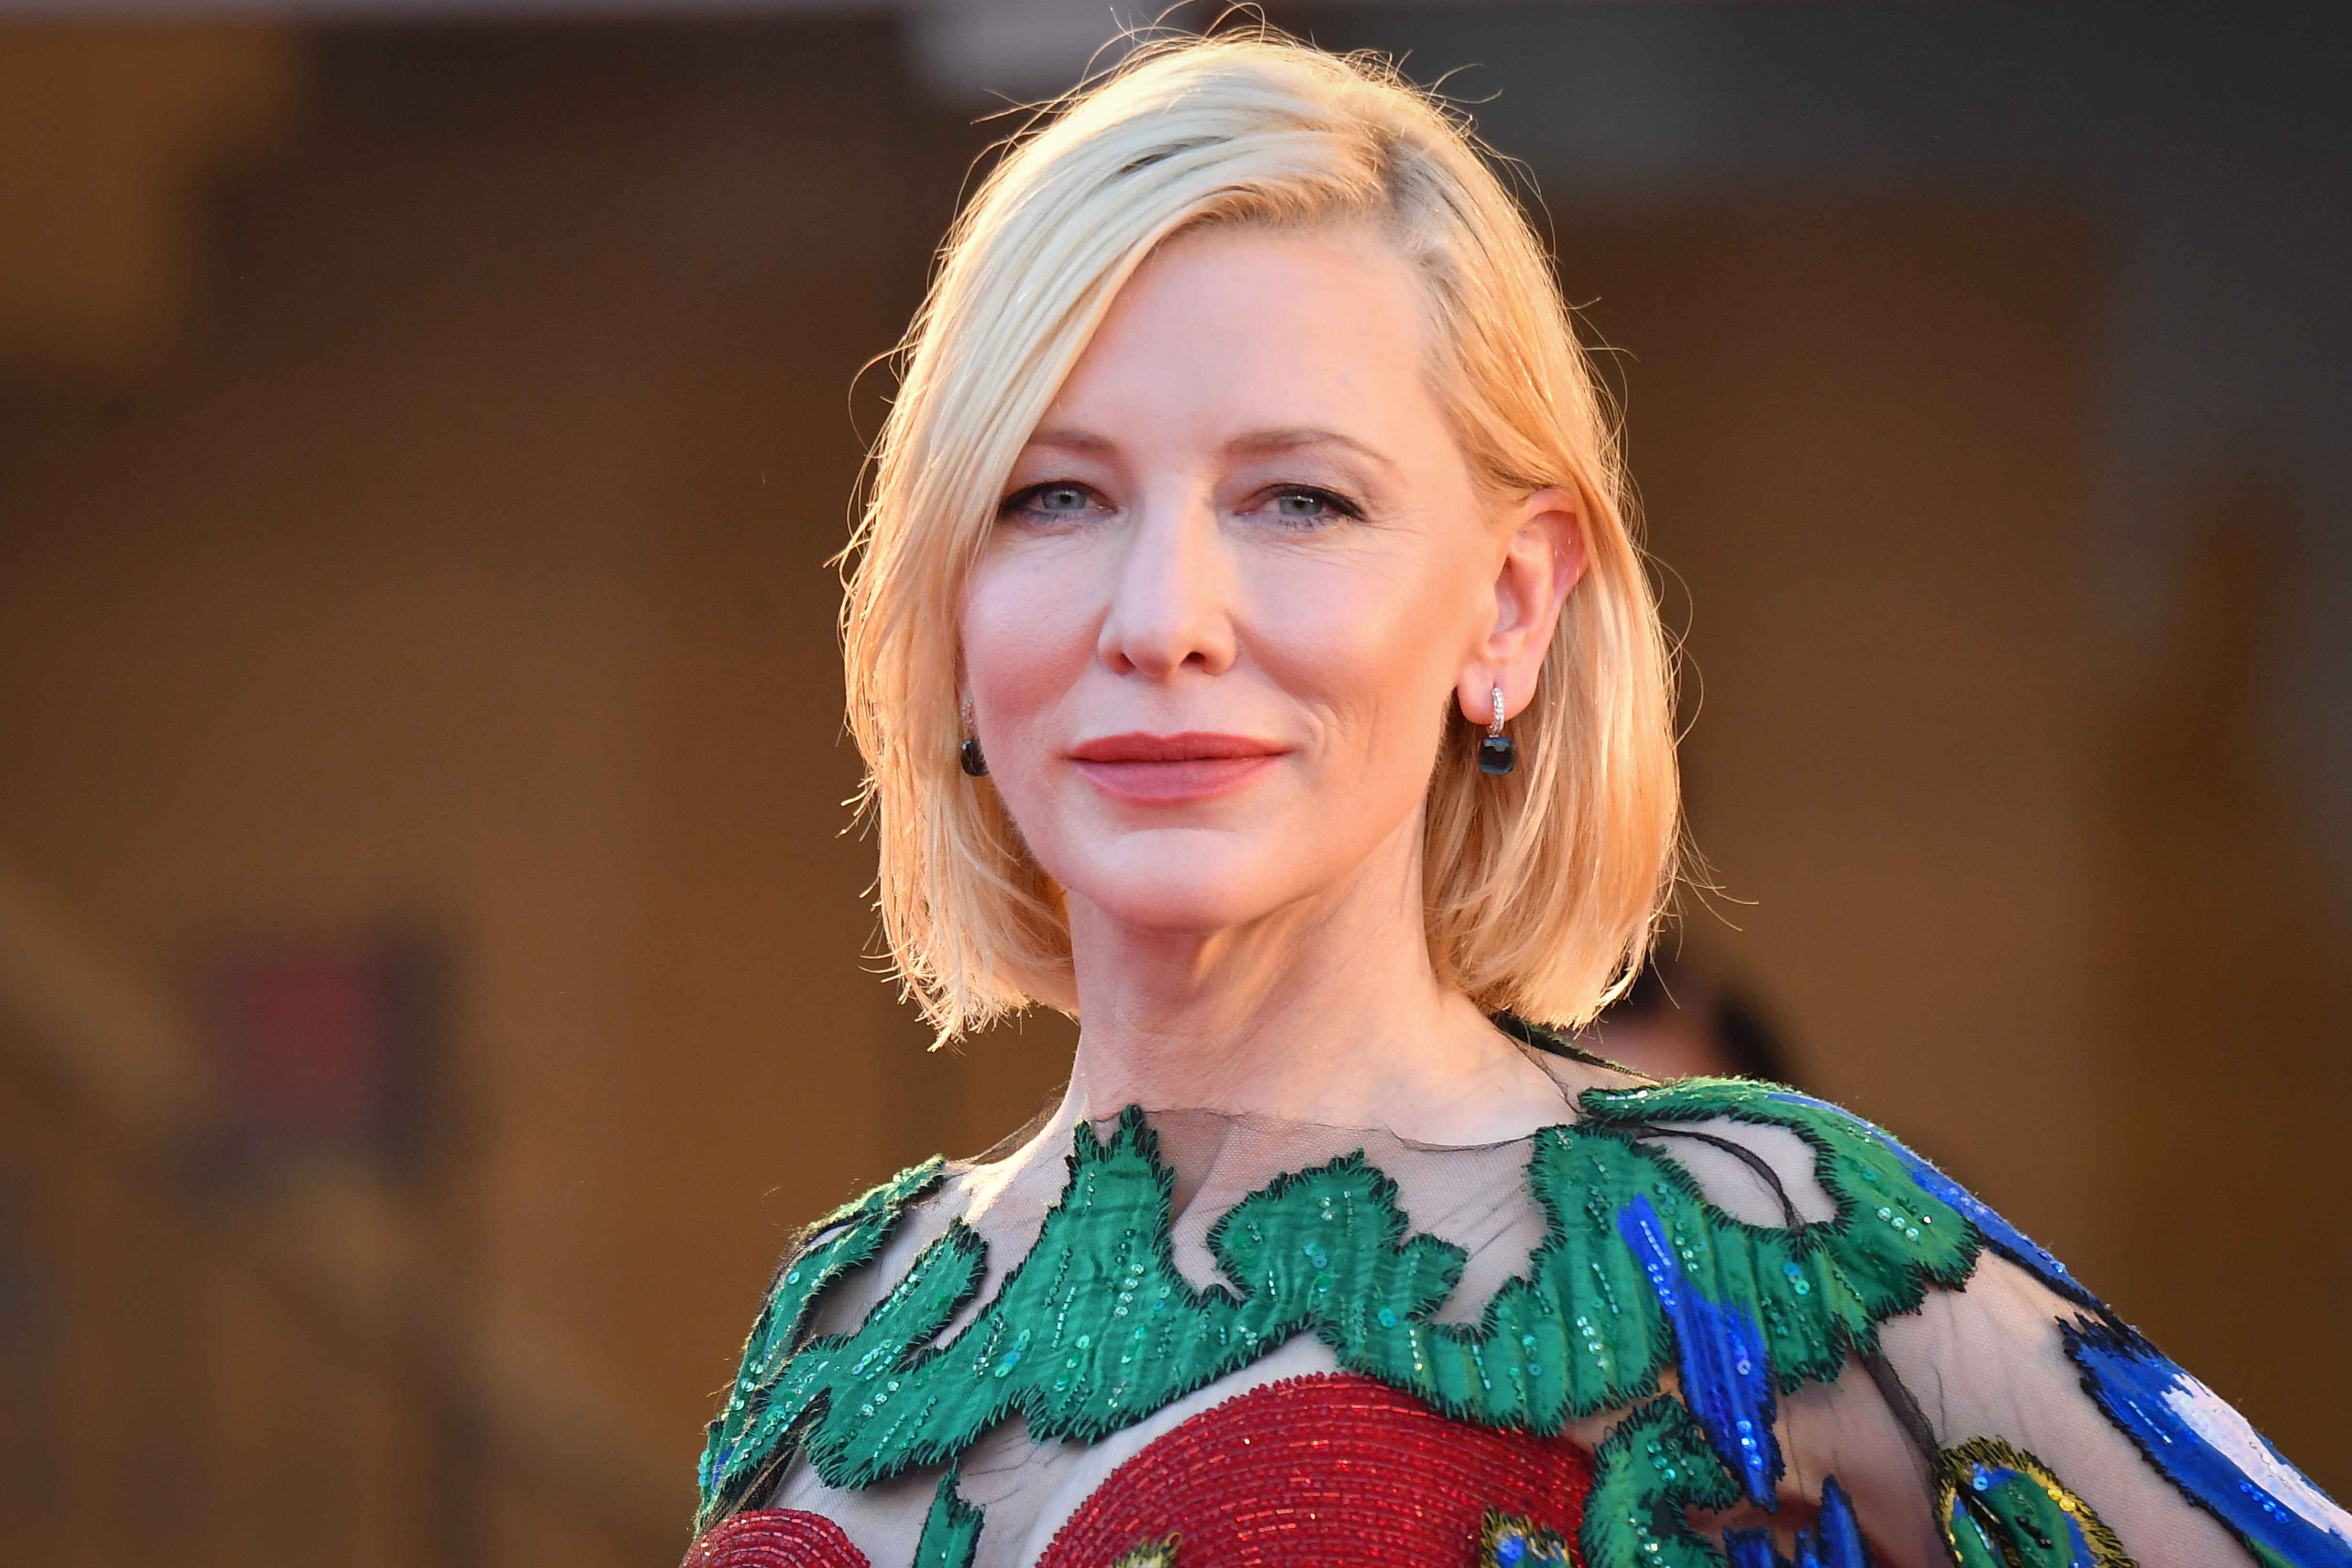 Cate Blanchett ahead of the closing ceremony at the 77th Venice Film Festival on September 12, 2020, in Venice, Italy | Source: Getty Images